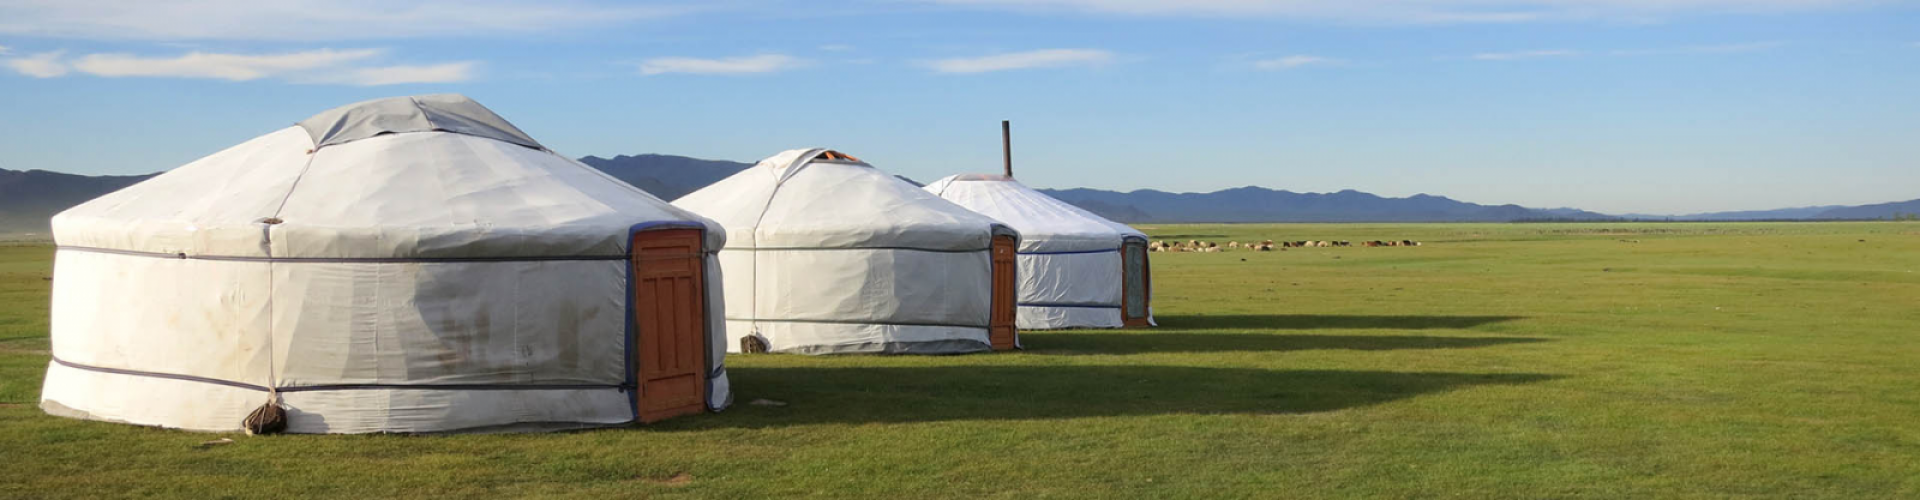 equestrian vacation in Mongolia